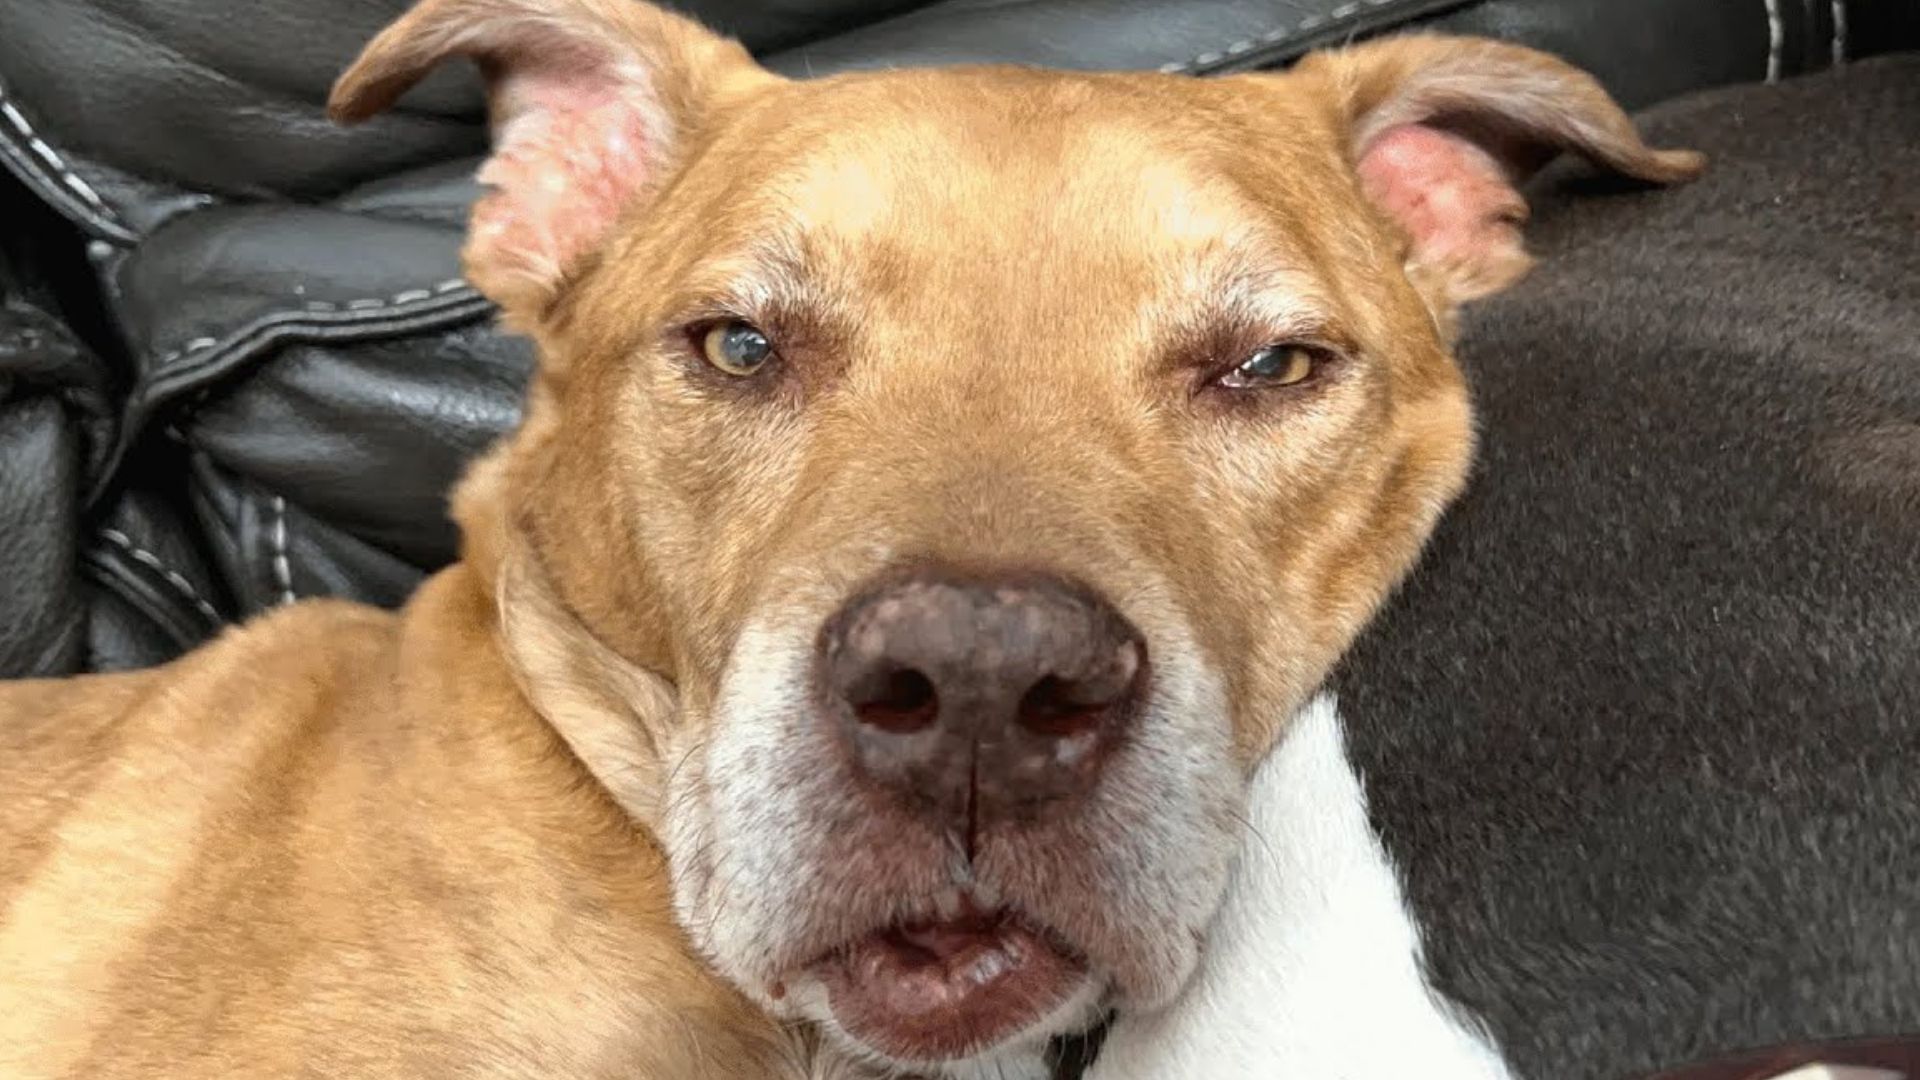 Senior Dog Finally Gets Adopted Only For His Rescuers To Learn Something Surprising About Him